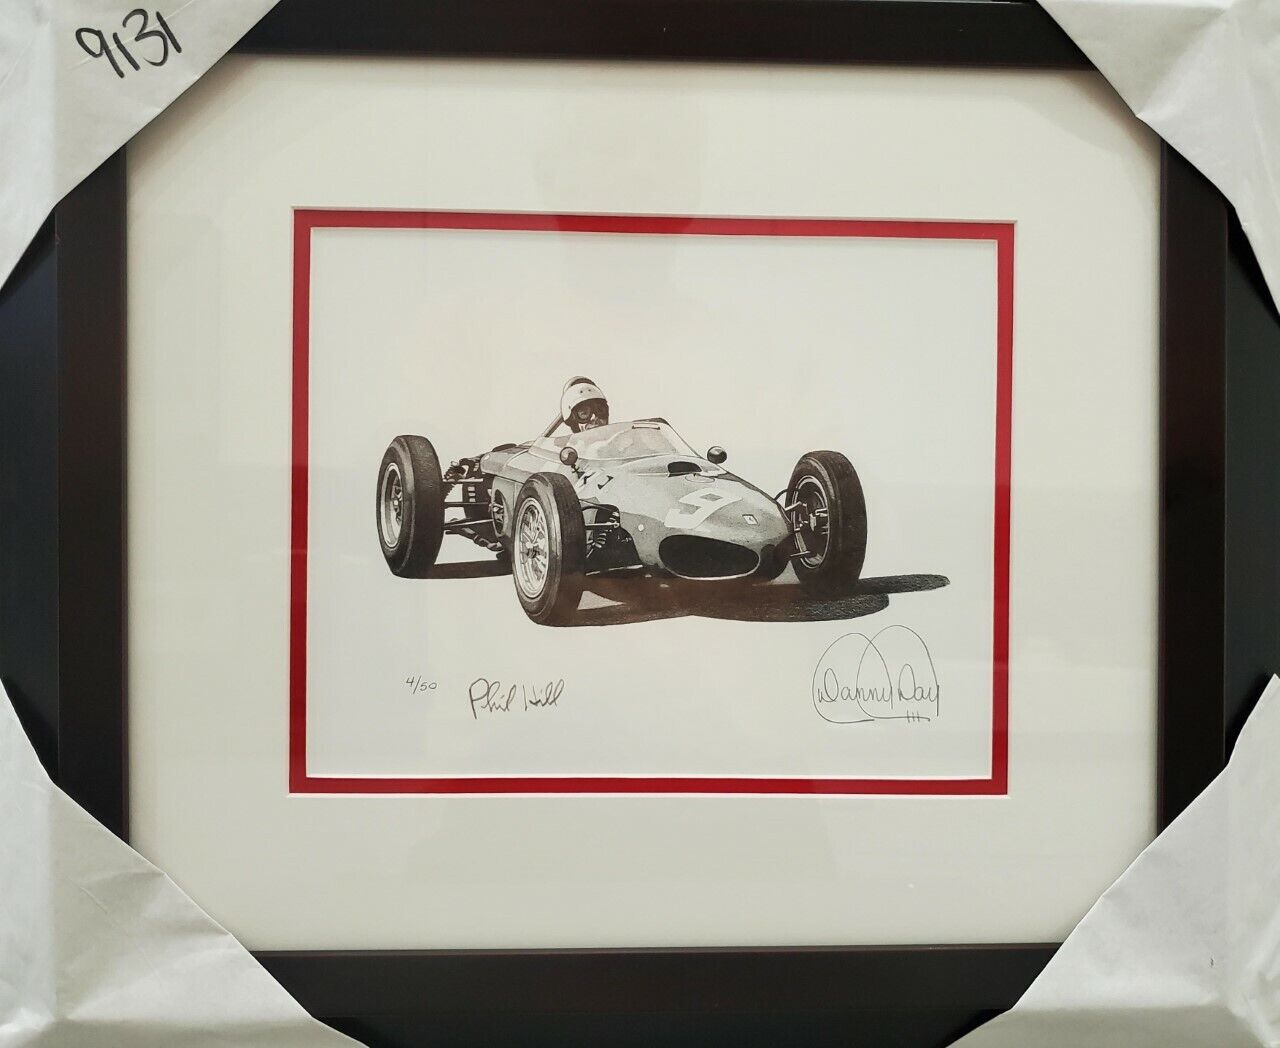 Ferrari 156 Sharknose  Autographed by Phil Hill